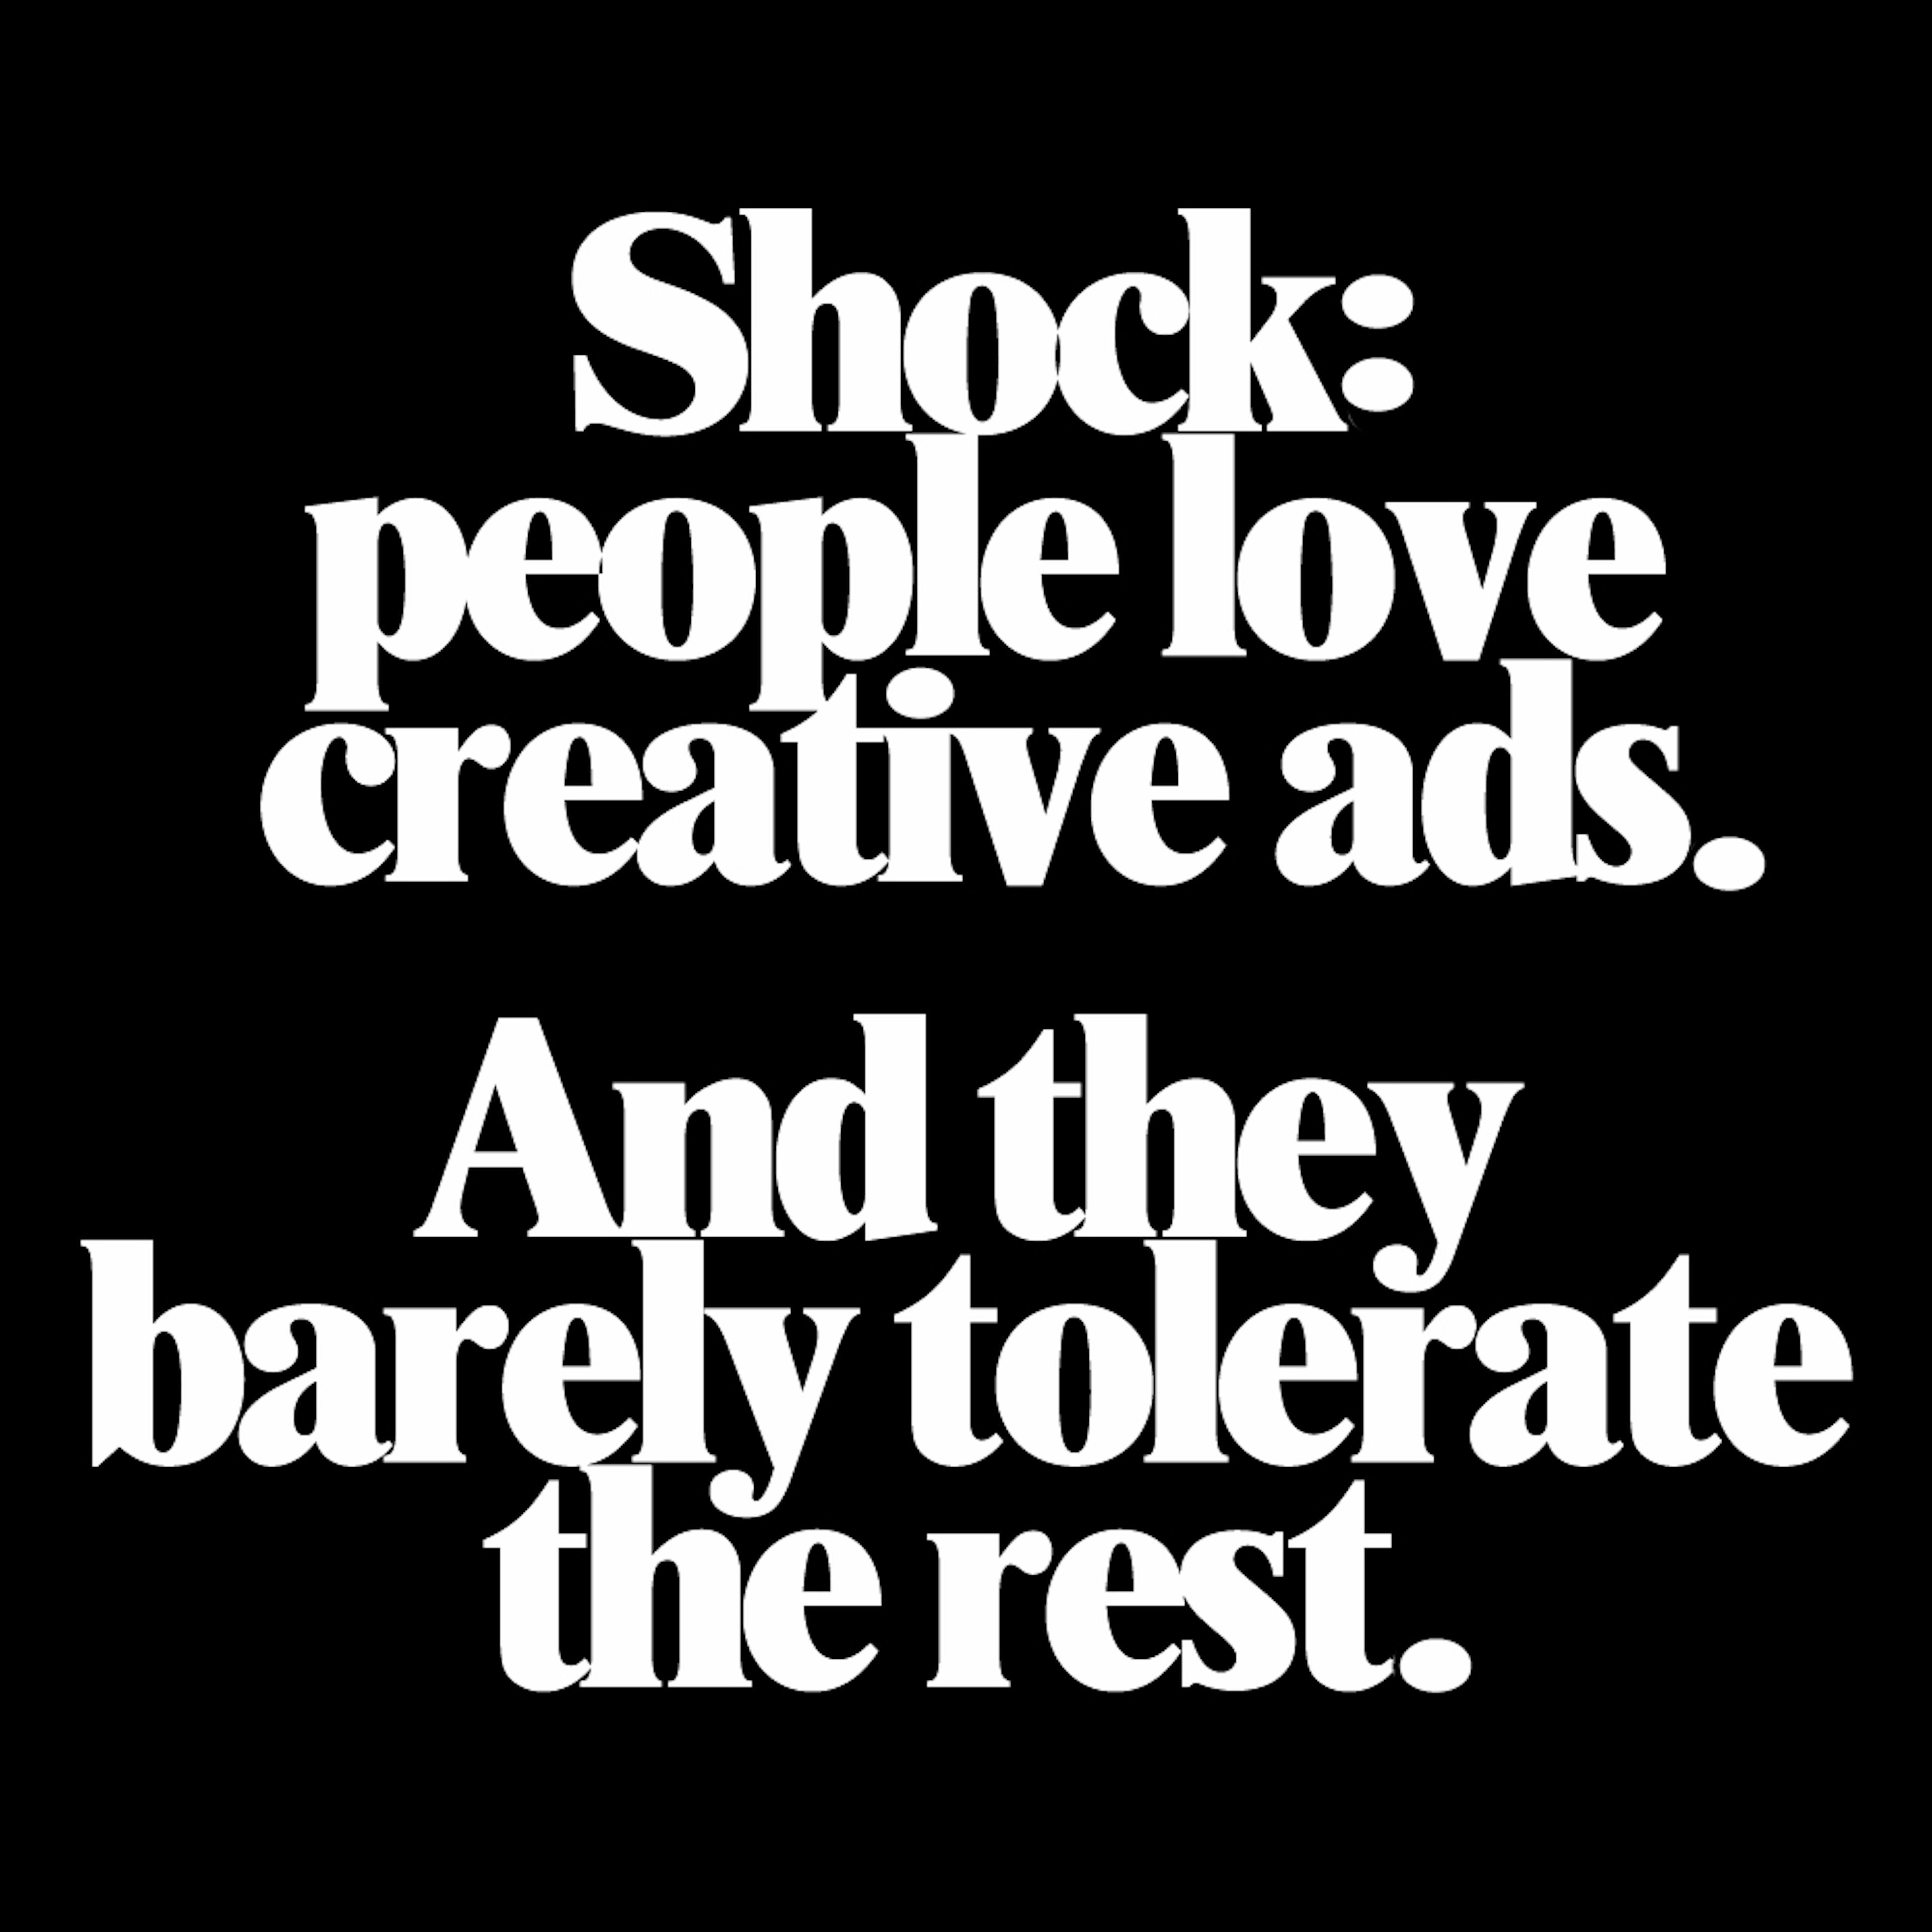 A sign that says Shock: people love creative ads.